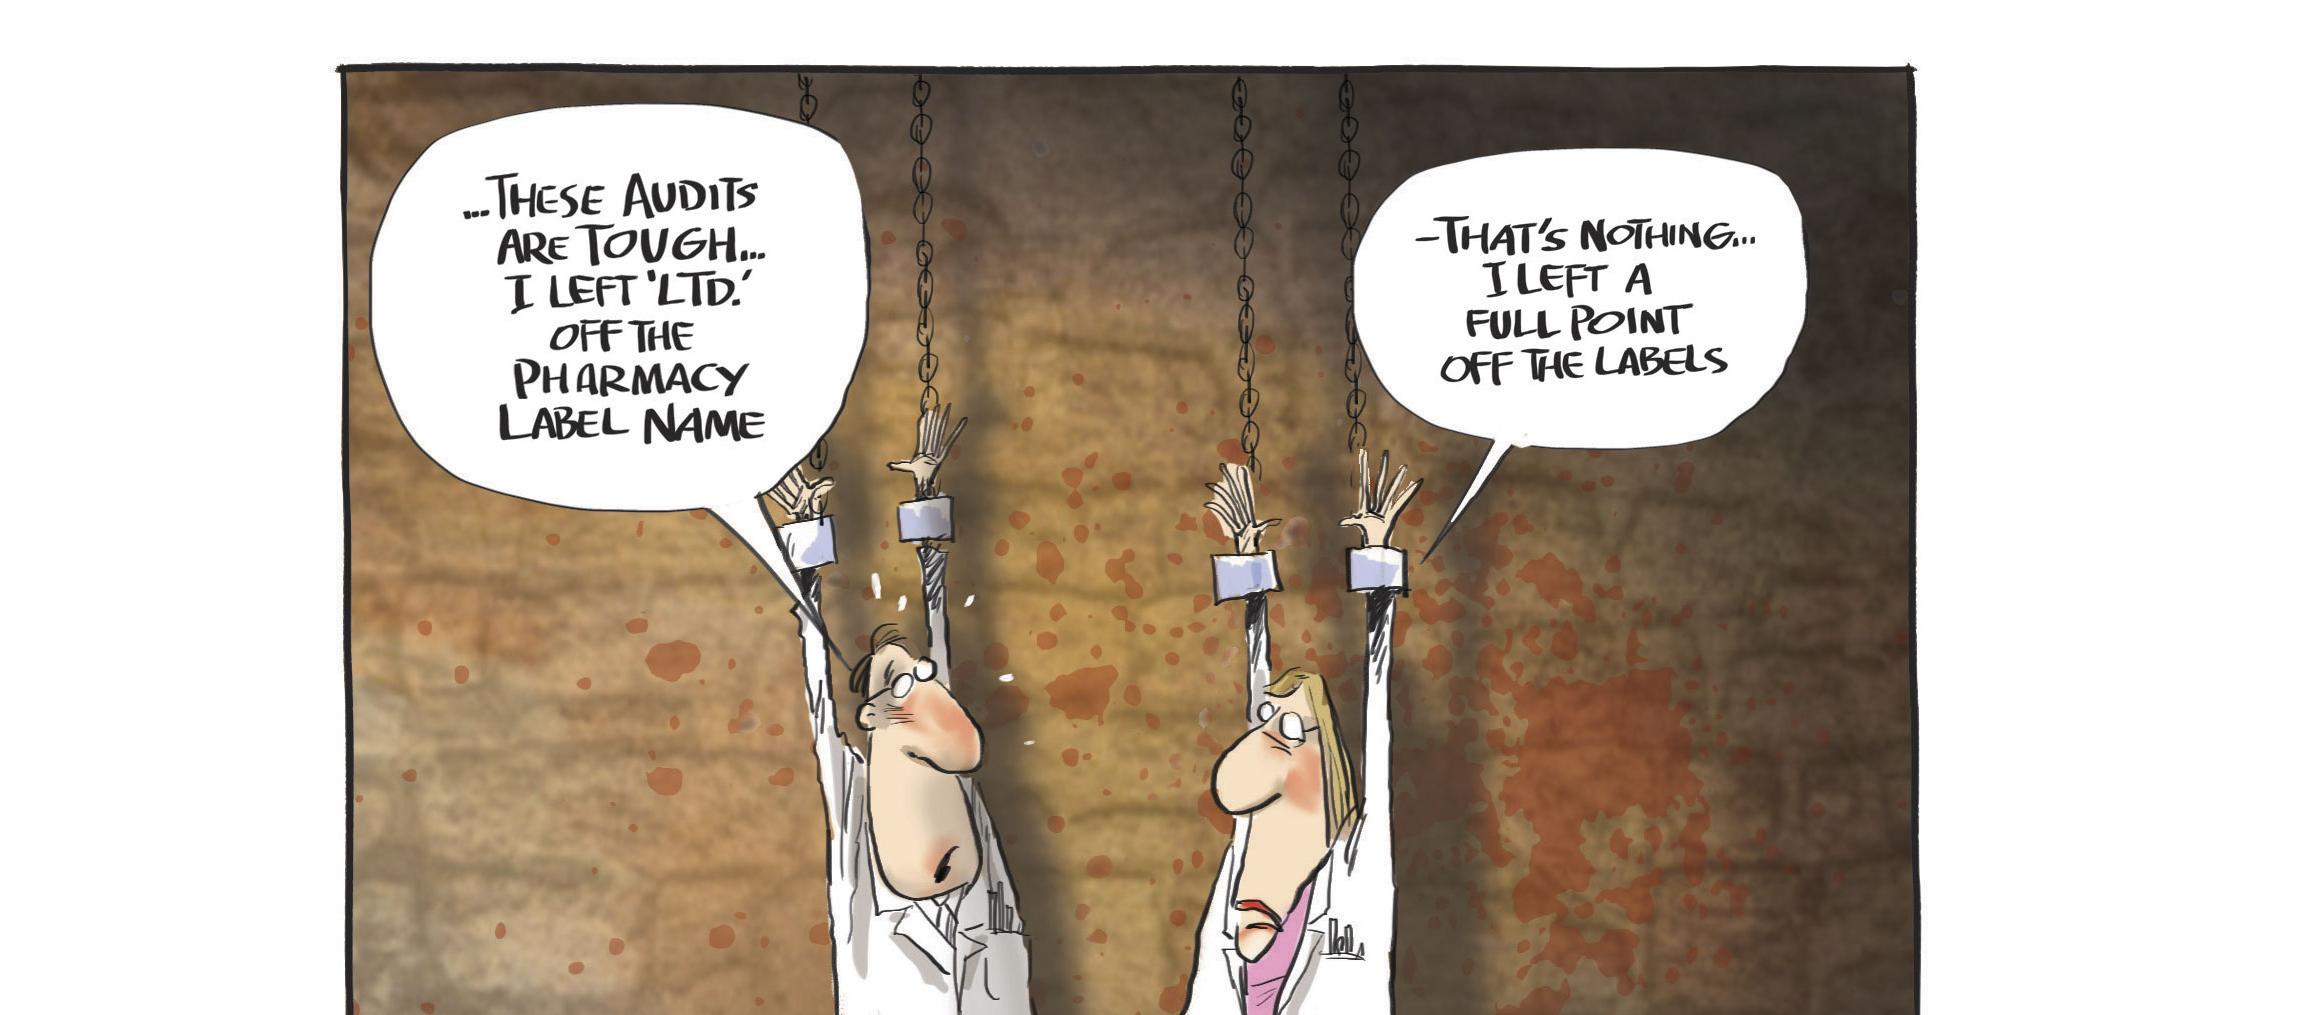 Audit Cartoon by Rod Emmerson